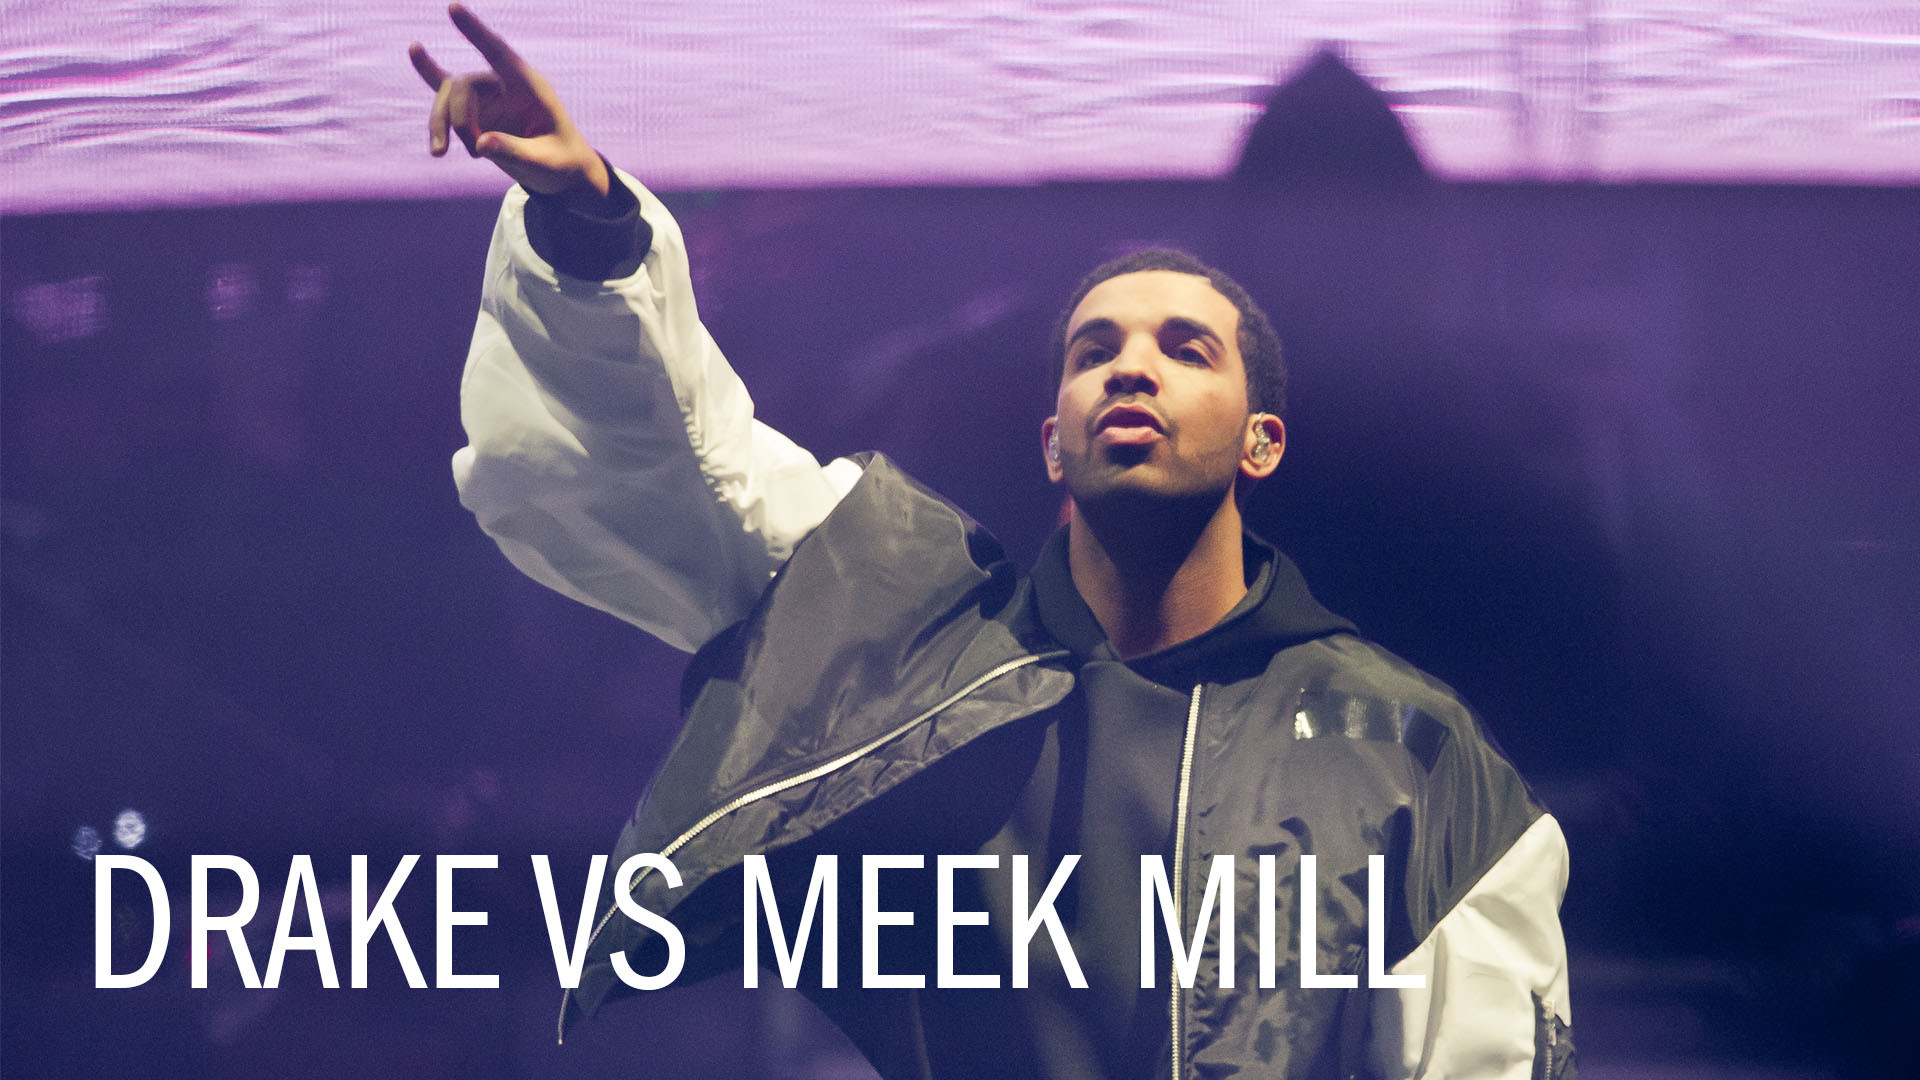 1920x1080 A Toronto City Councillor Wants In On The Meek Mill/Drake Twitter Feud |  Time